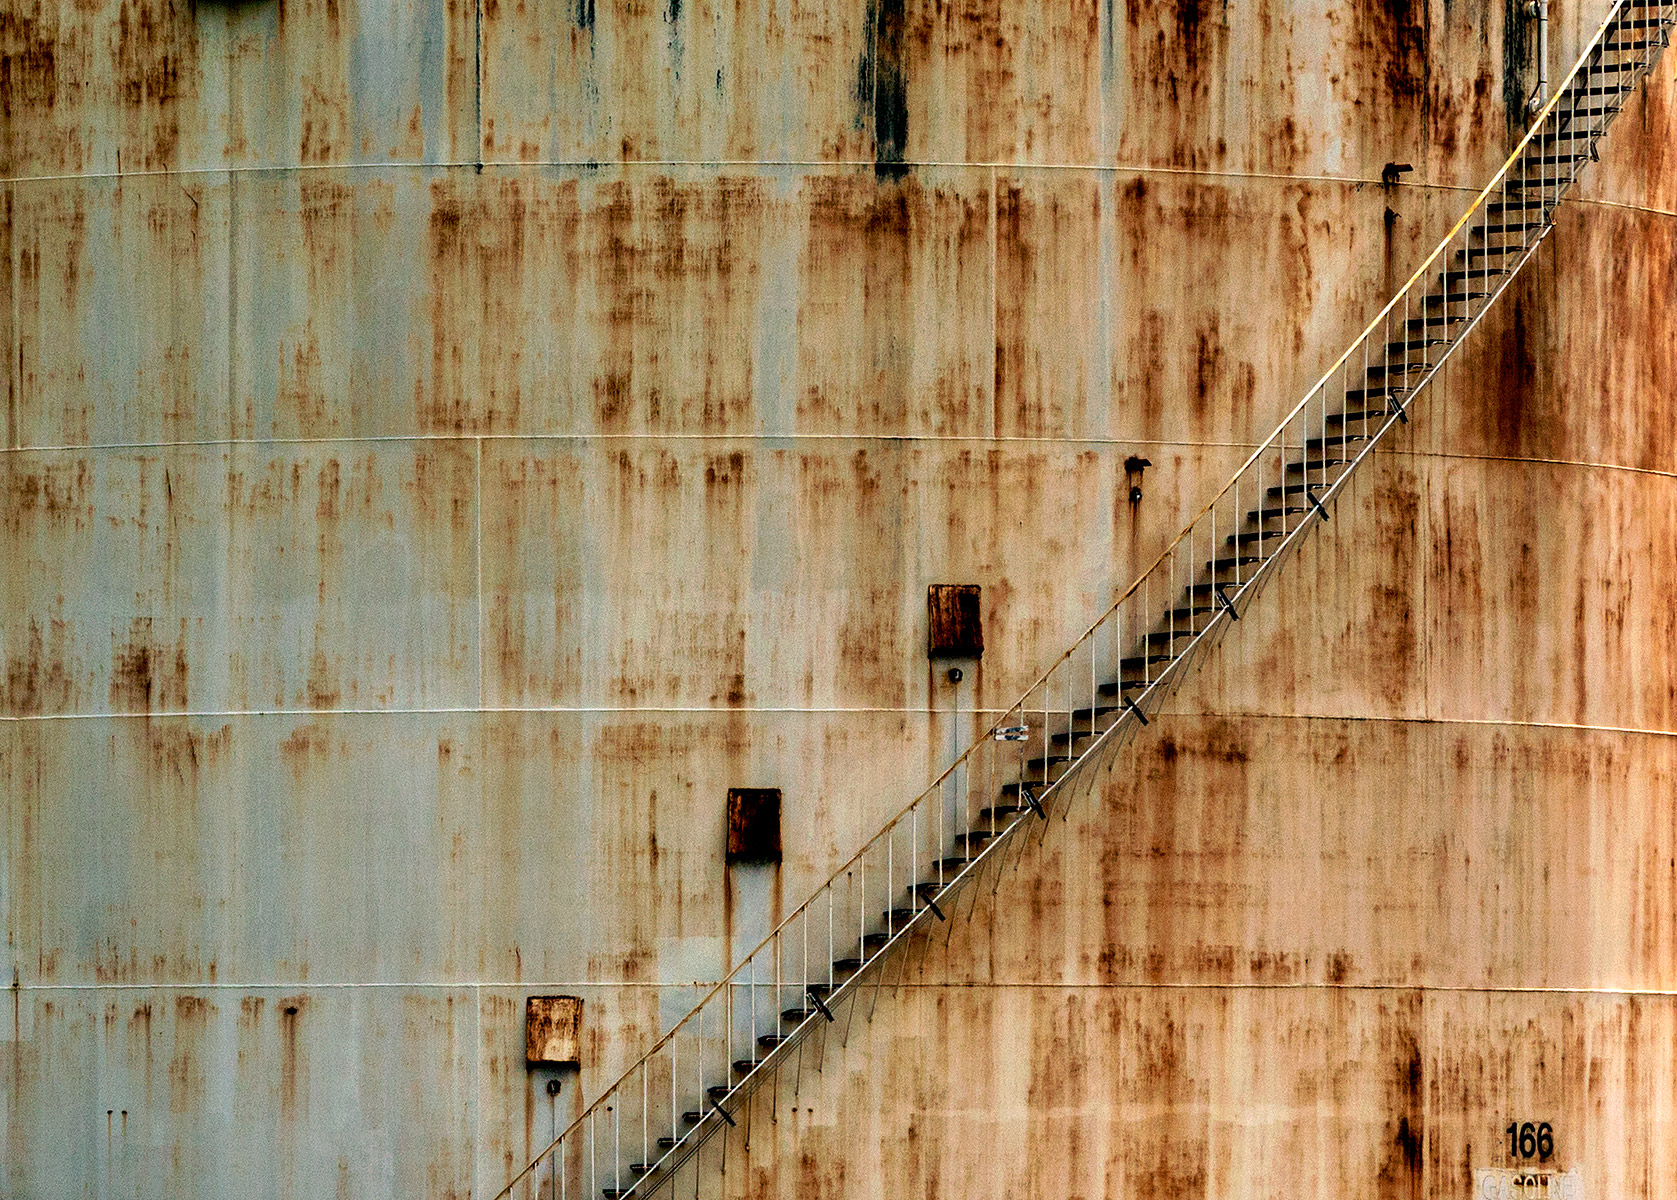 20150830. Rust, rail and stairs. Minimal Aesthetic 66.